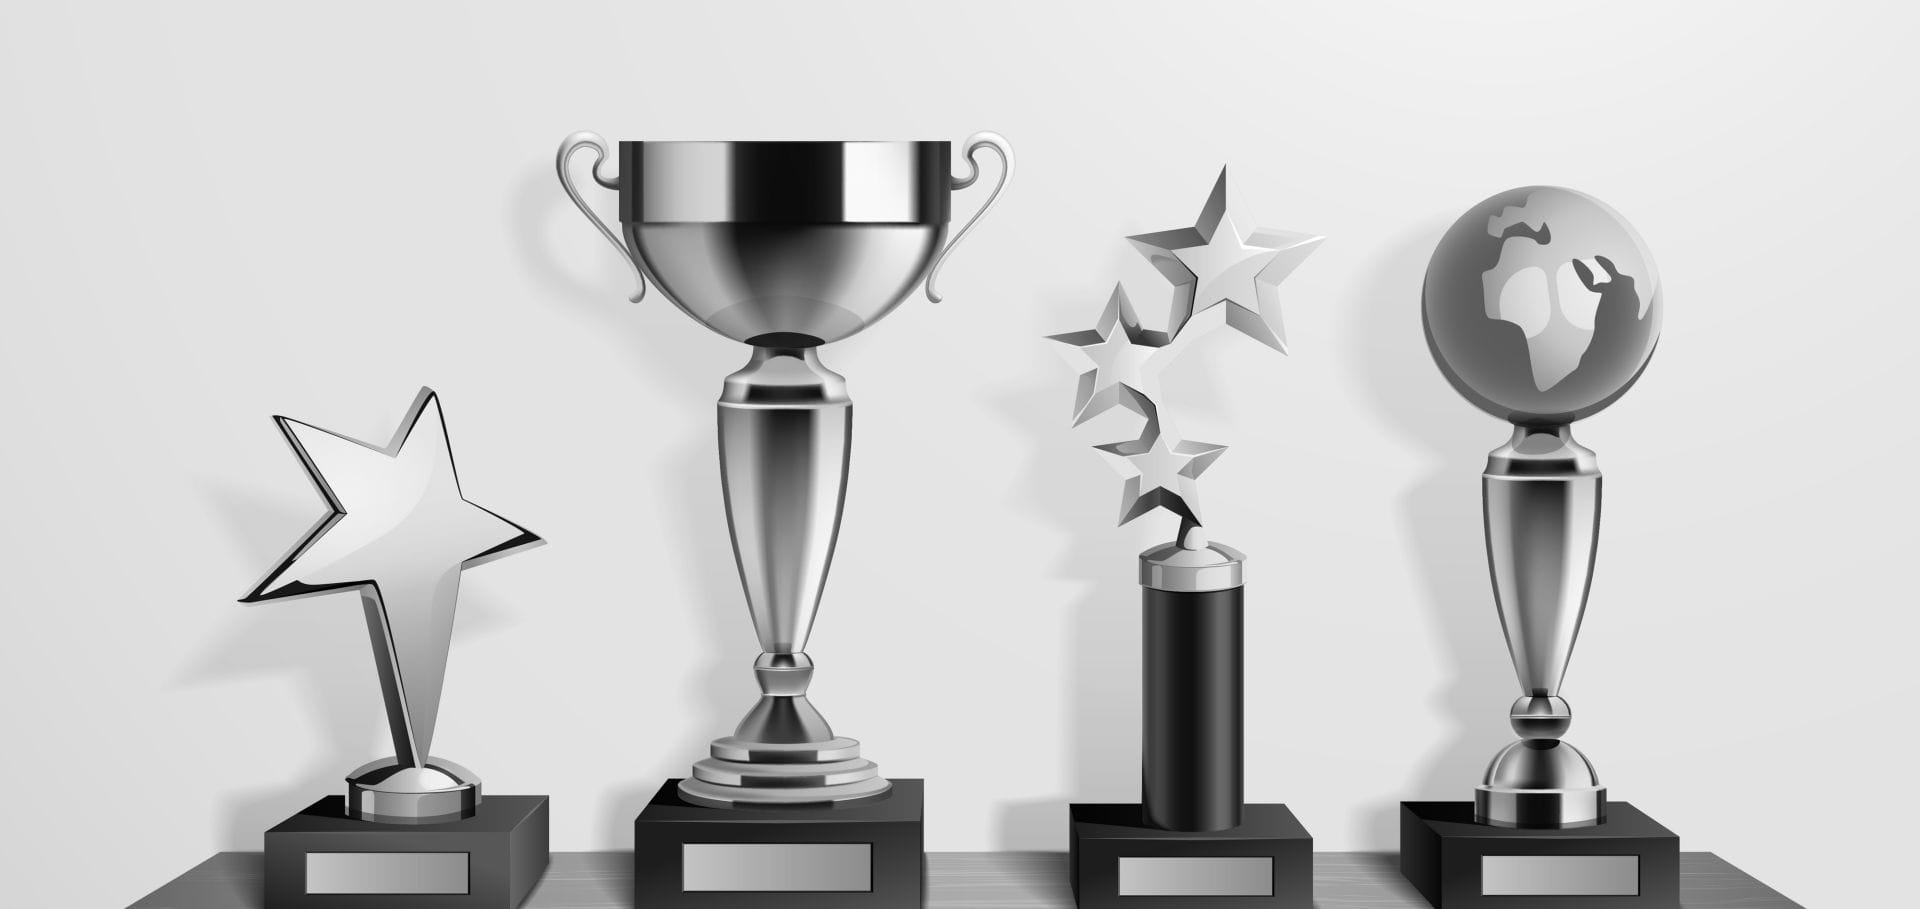 Image of trophies and awards